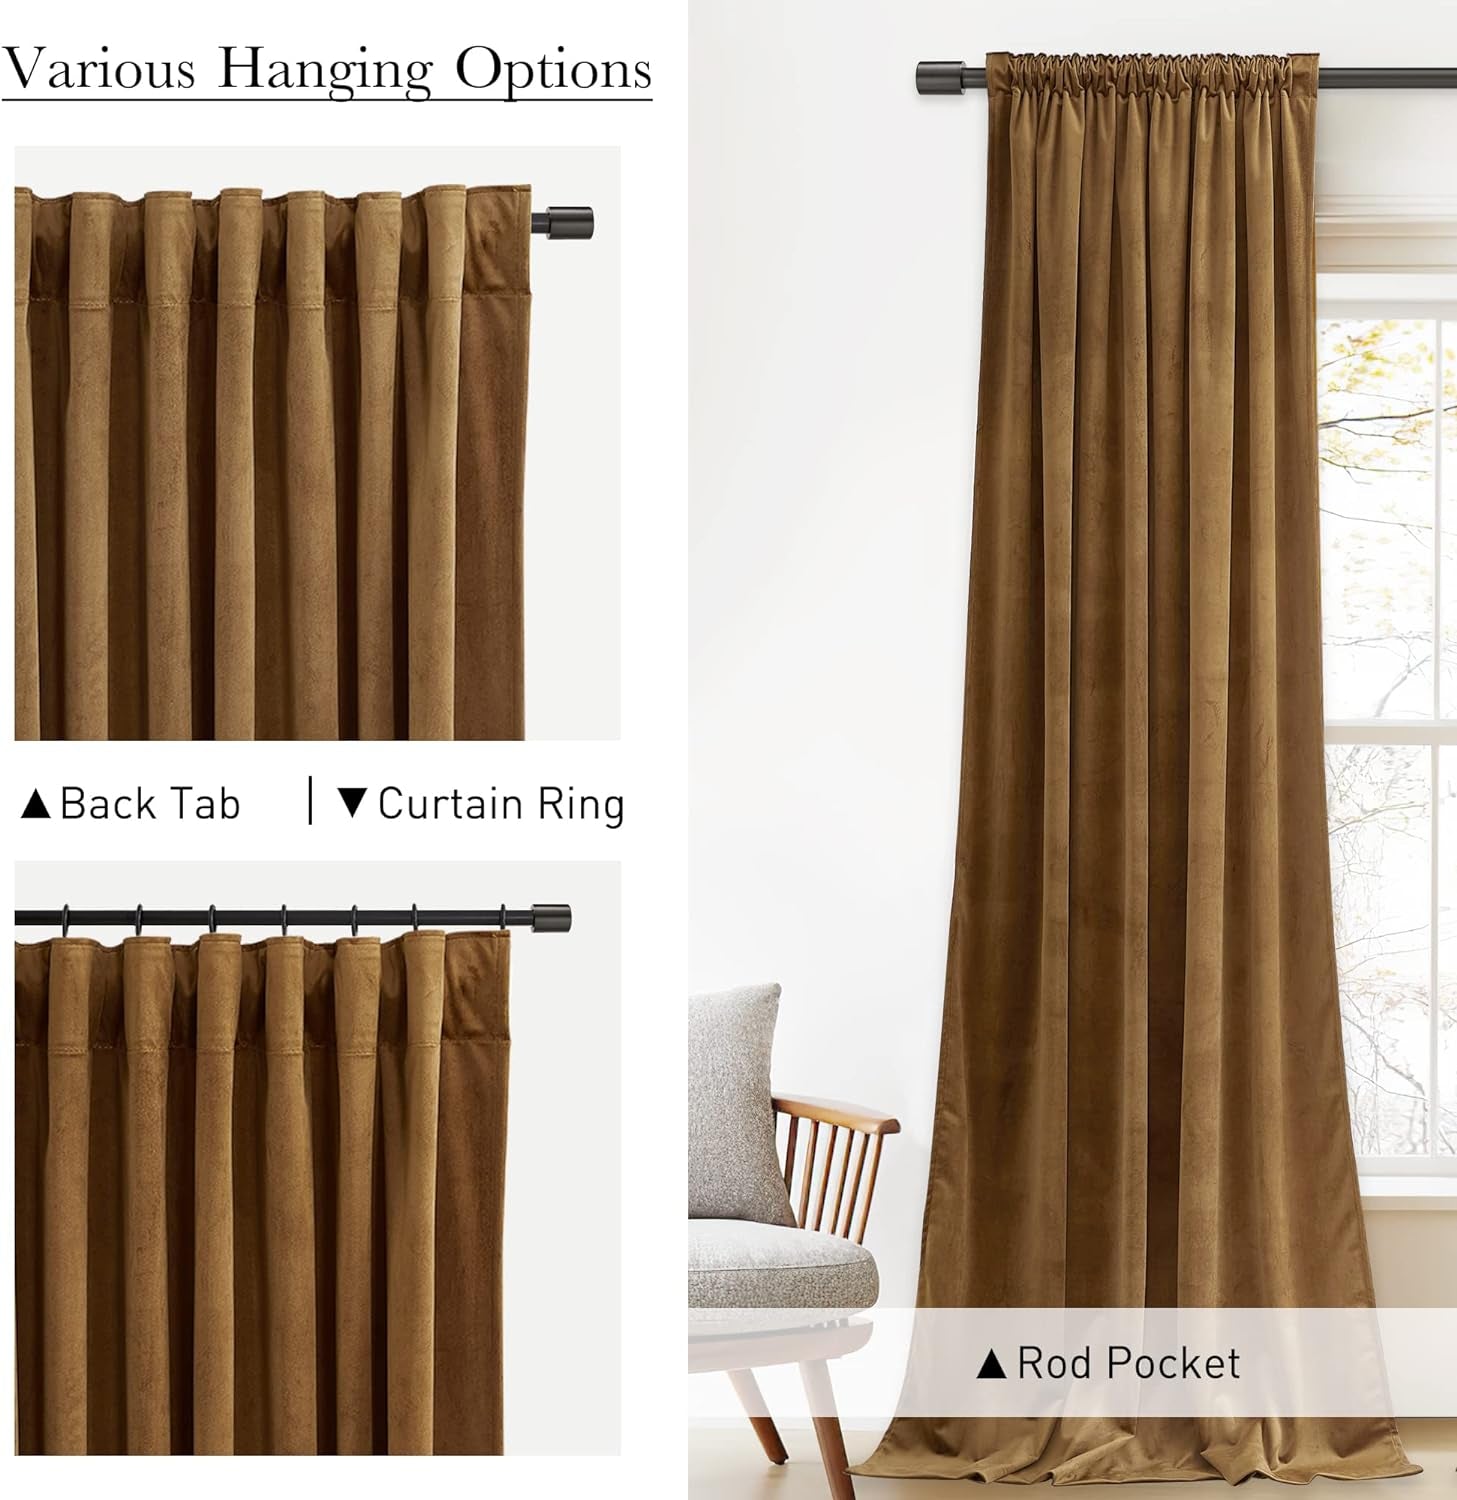 Stangh Velvet Curtains 84 Inches - Gold Brown Blackout Thermal Insulated Window Drapes for Living Room, Back Tab Luxury Home Decor Curtains for Bedroom Sliding Door, W52 X L84, 2 Panels  StangH   